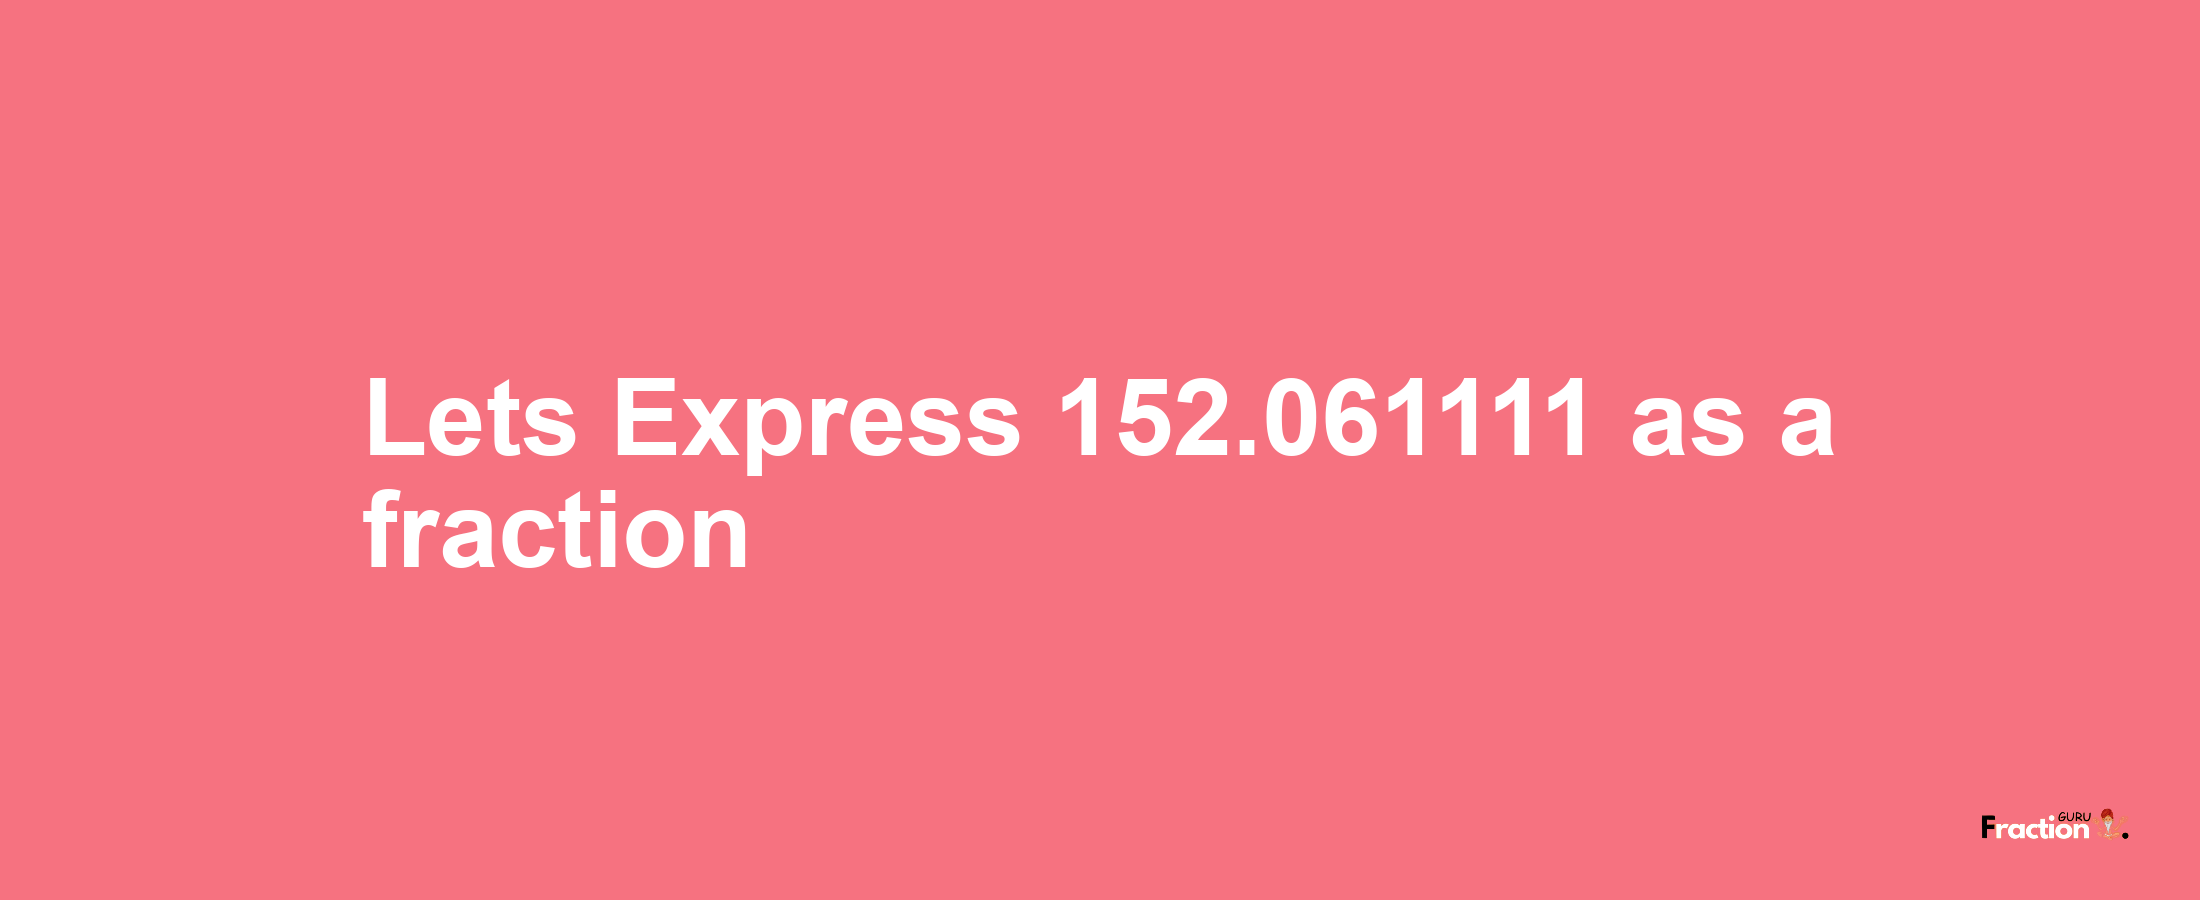 Lets Express 152.061111 as afraction